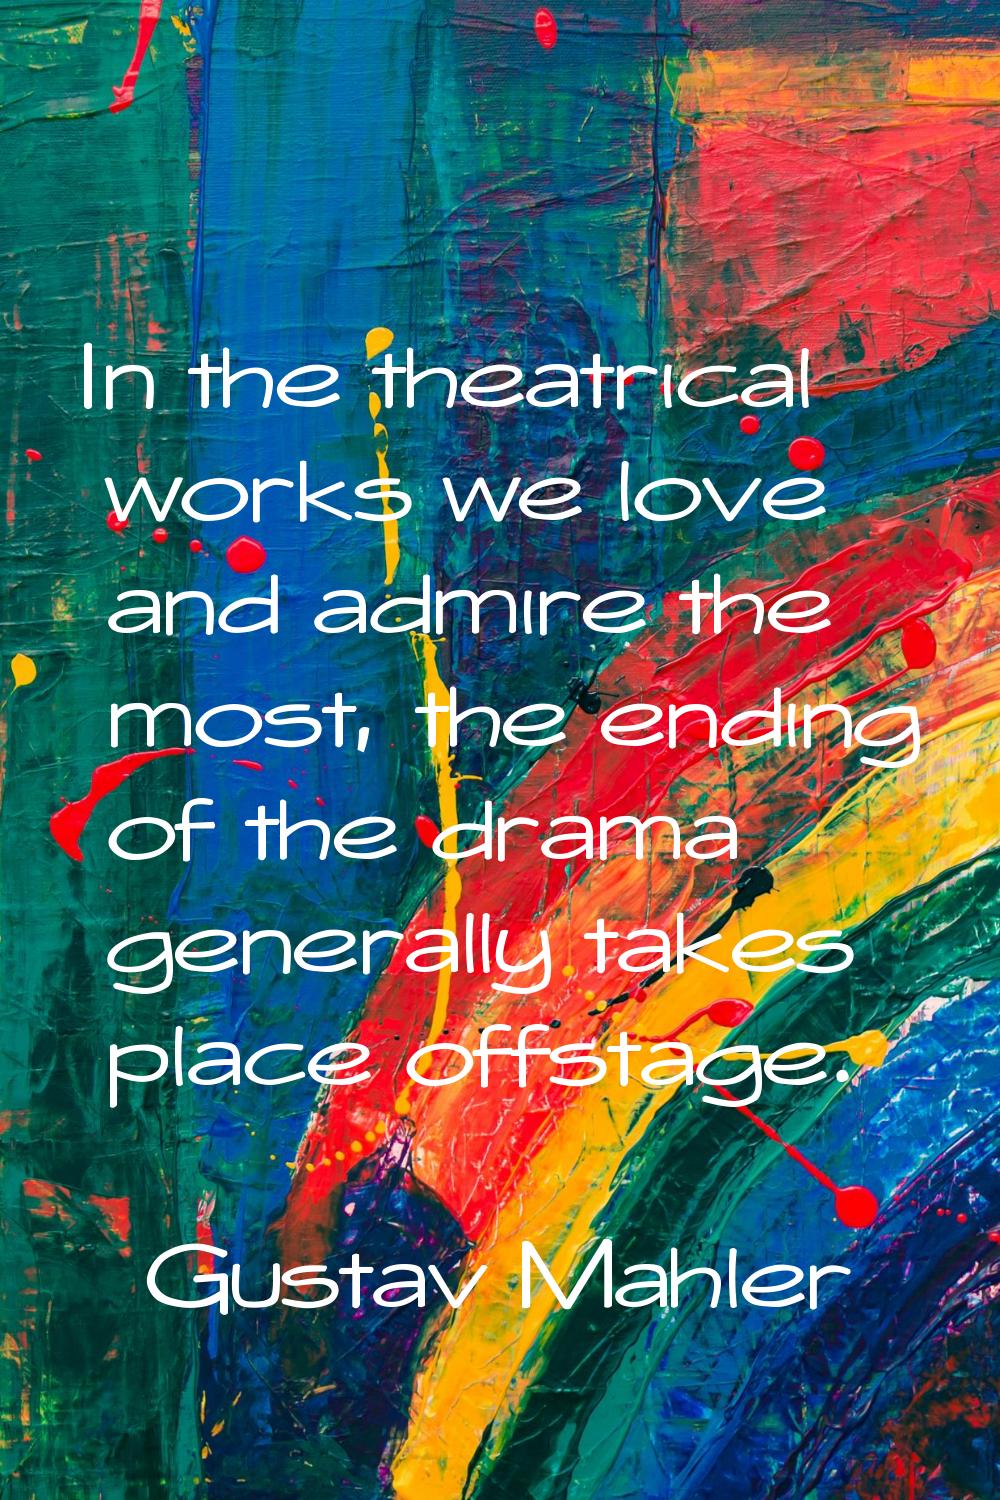 In the theatrical works we love and admire the most, the ending of the drama generally takes place 